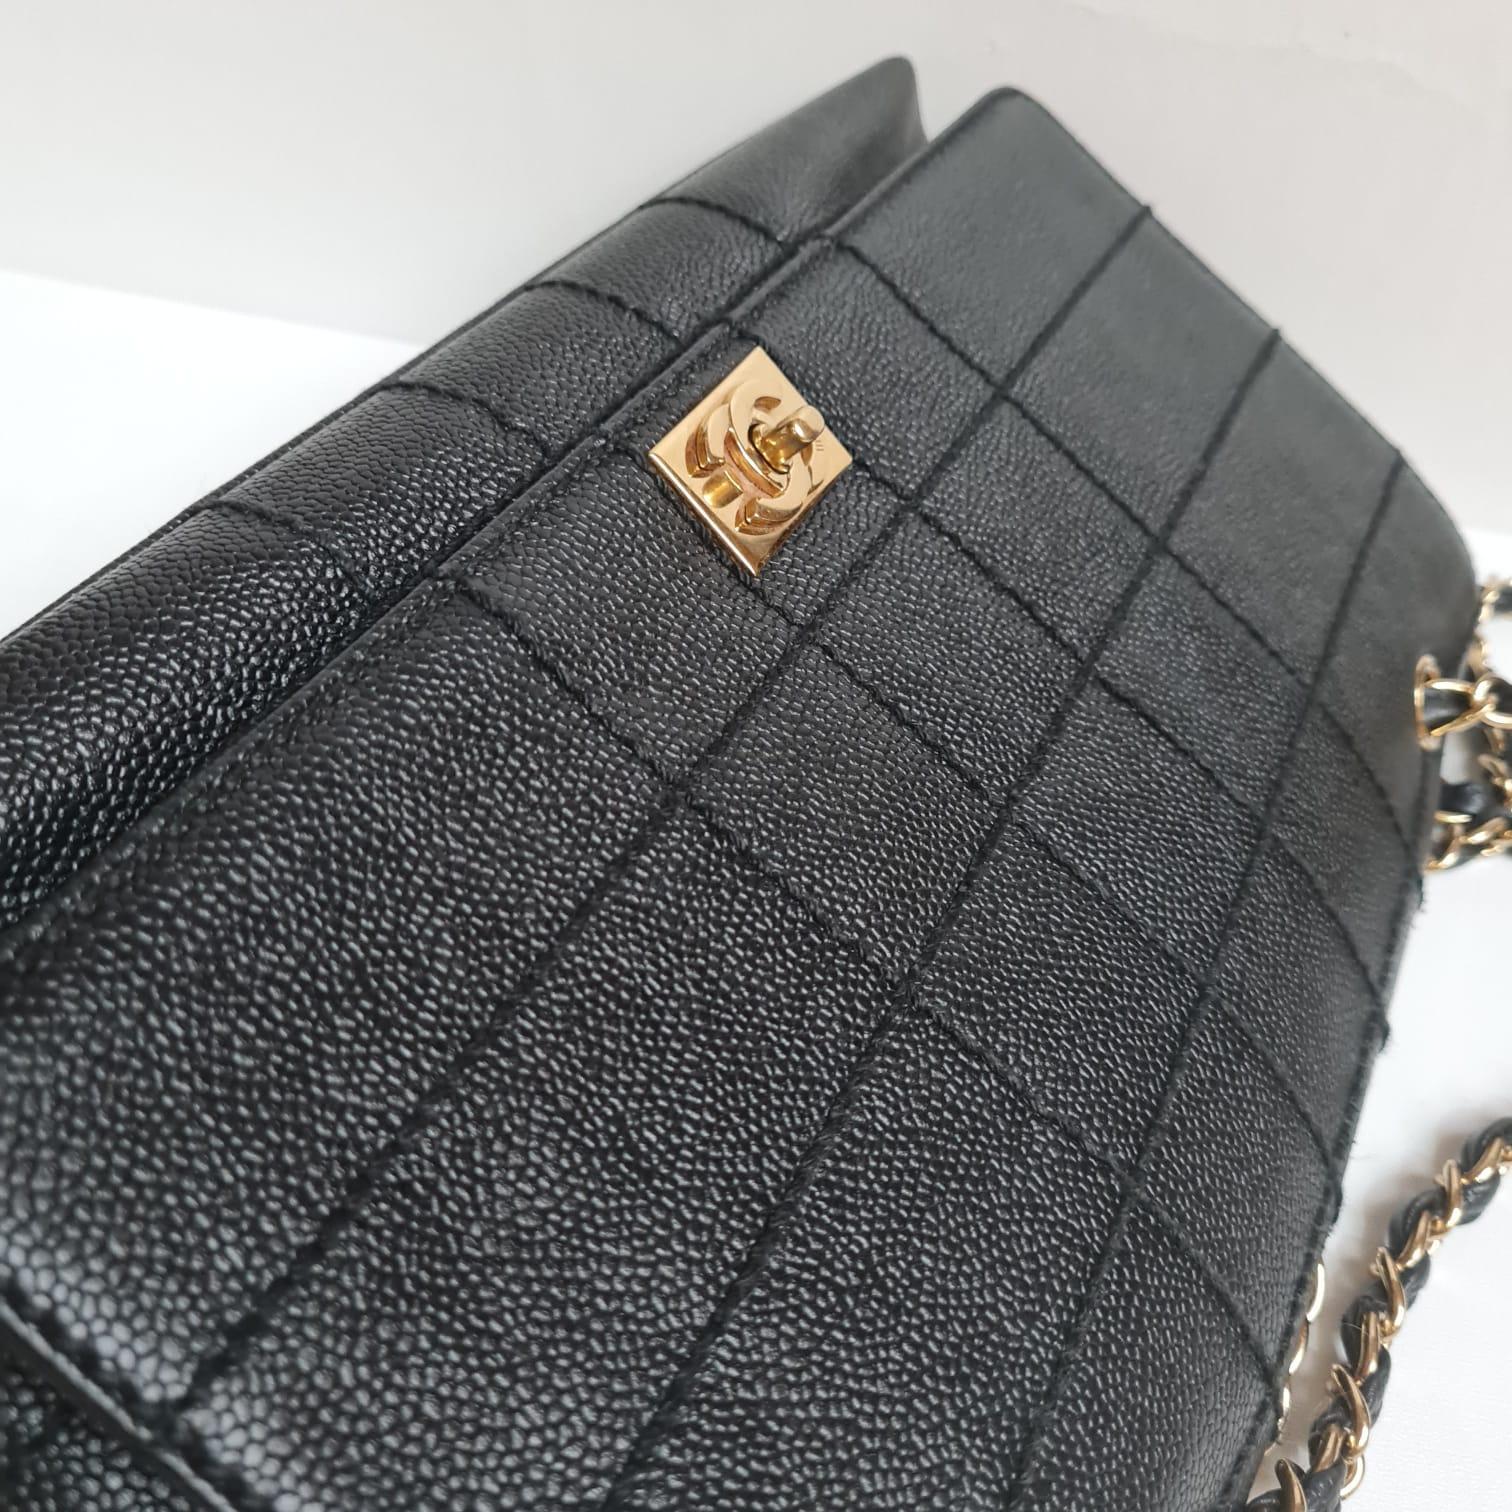 Chanel caviar quilted bag from early 2000s. Unique quilting details. In really great condition. Light wrinkling on the leather flap and the hologram has changed color due to storage. Comes as it is. Item series #7.